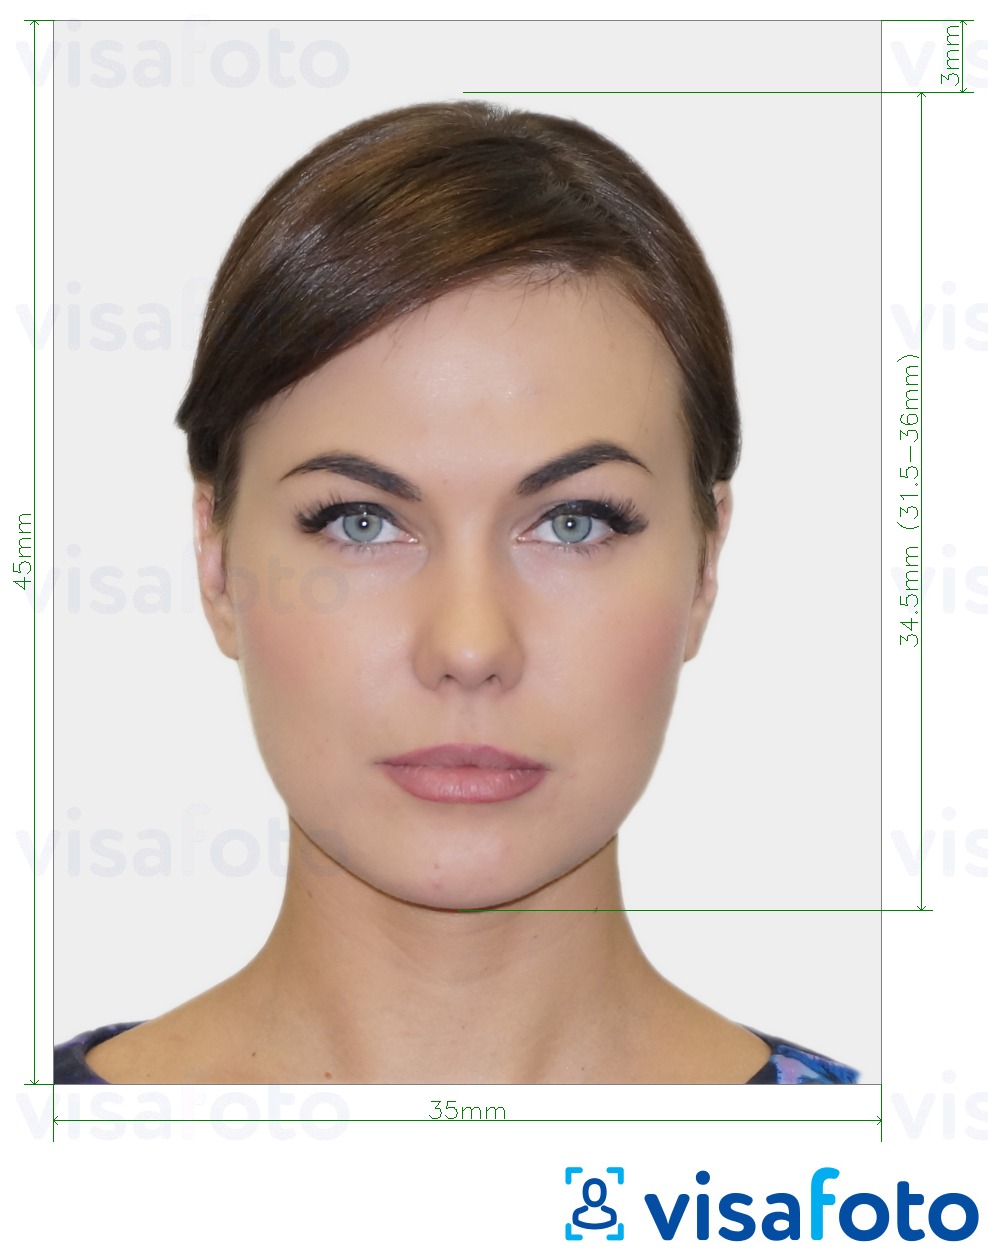 Example of photo for France Passport 35x45 mm (3.5x4.5 cm) with exact size specification